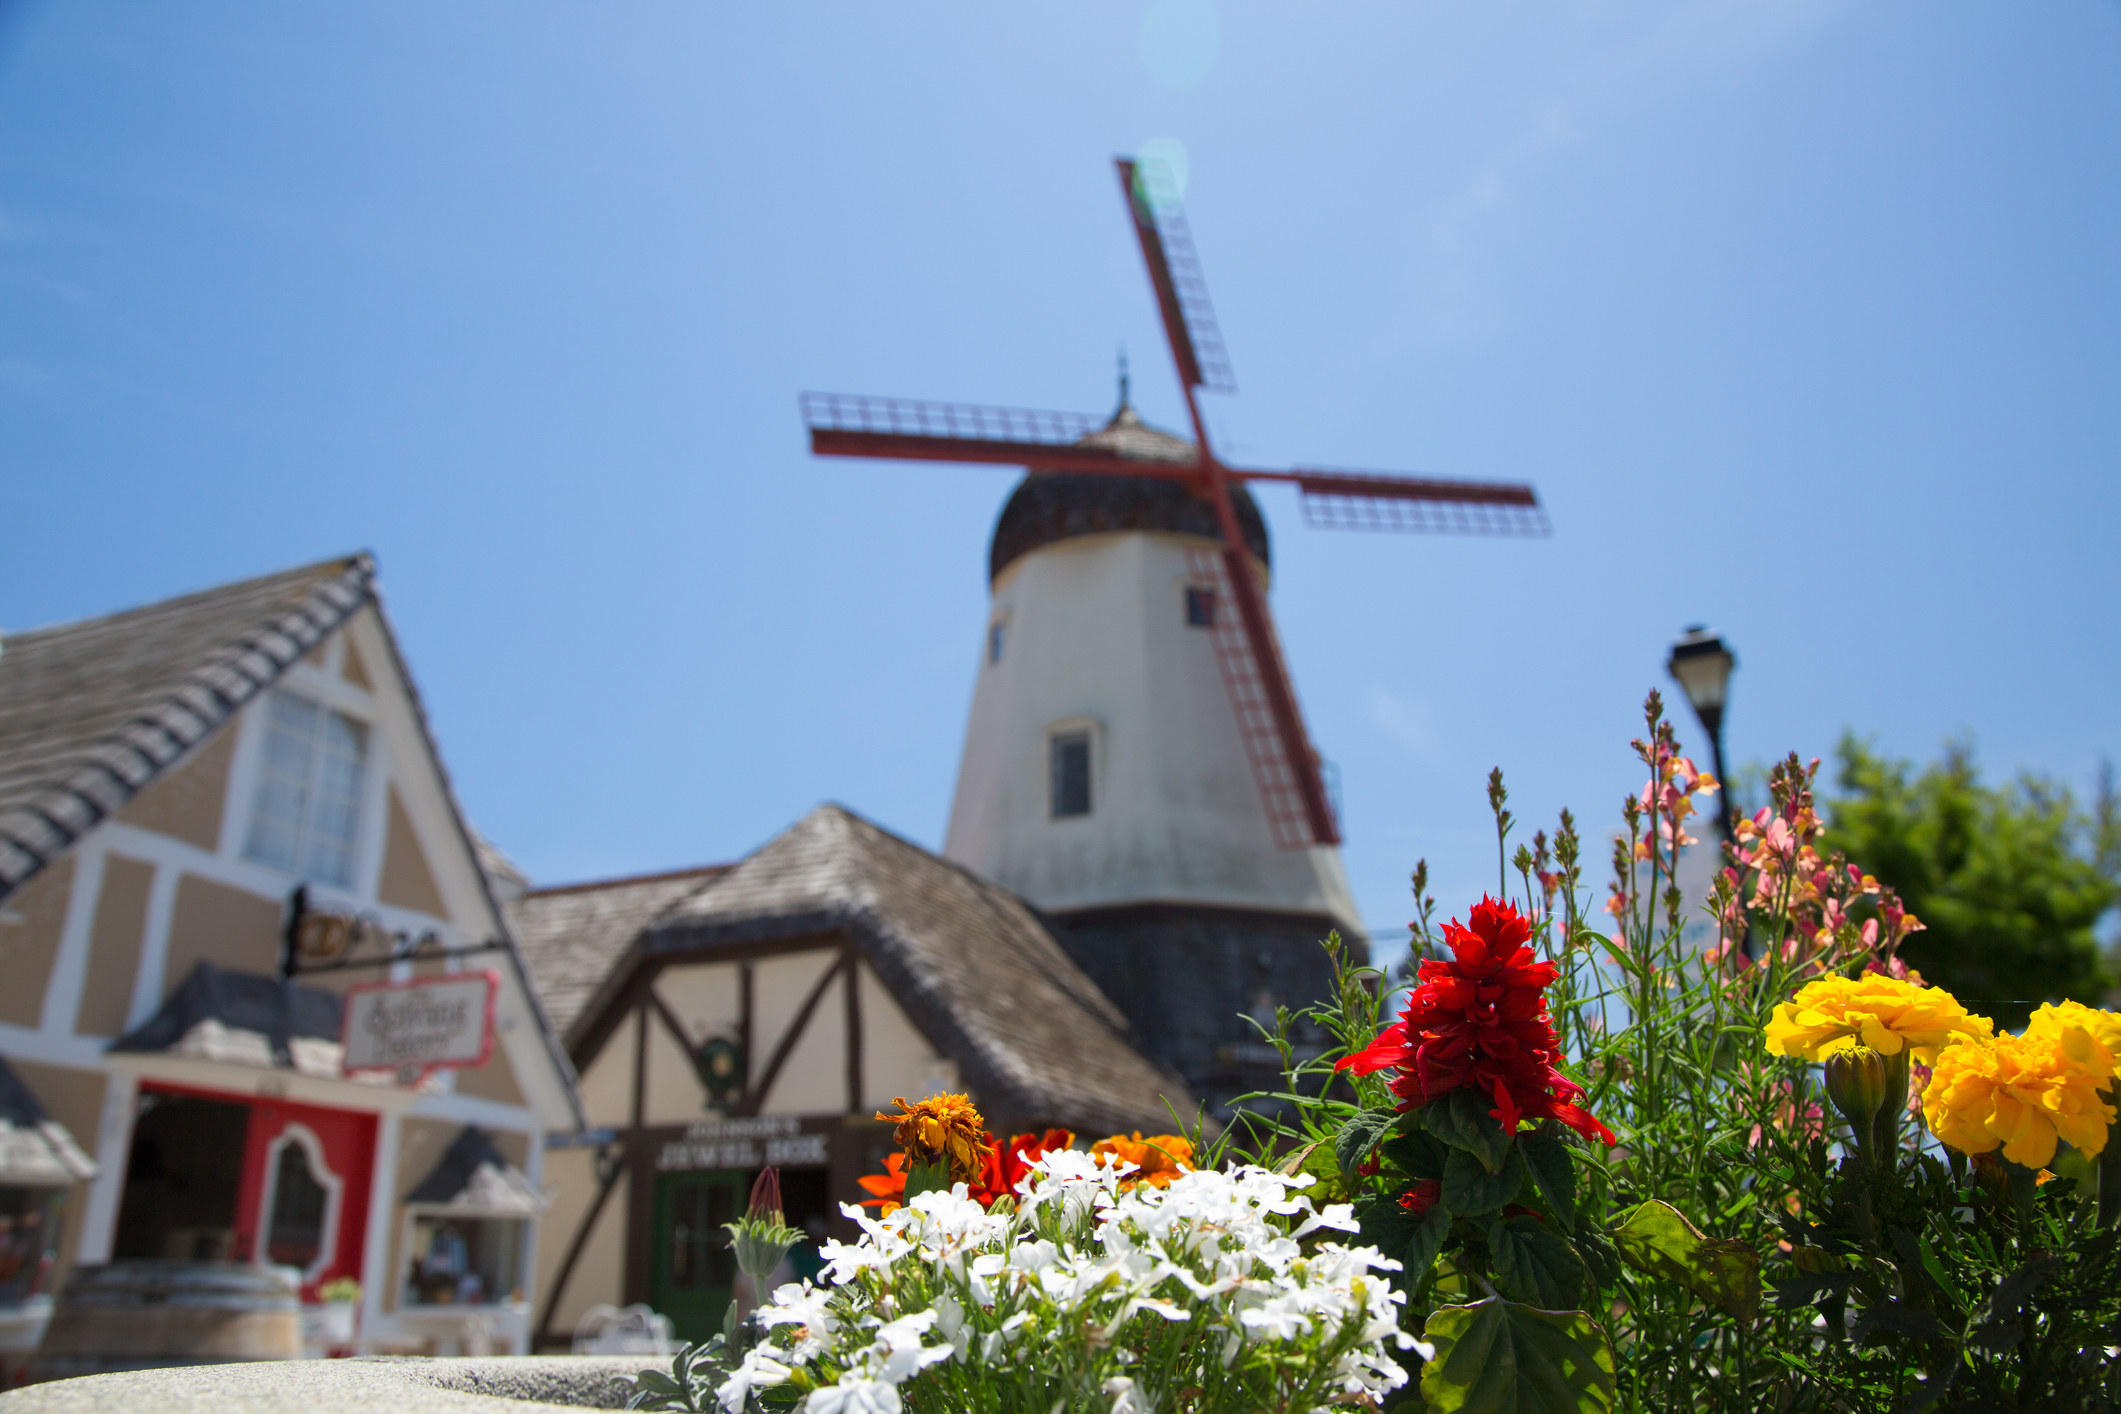 Flowers in front of Solvang windmill